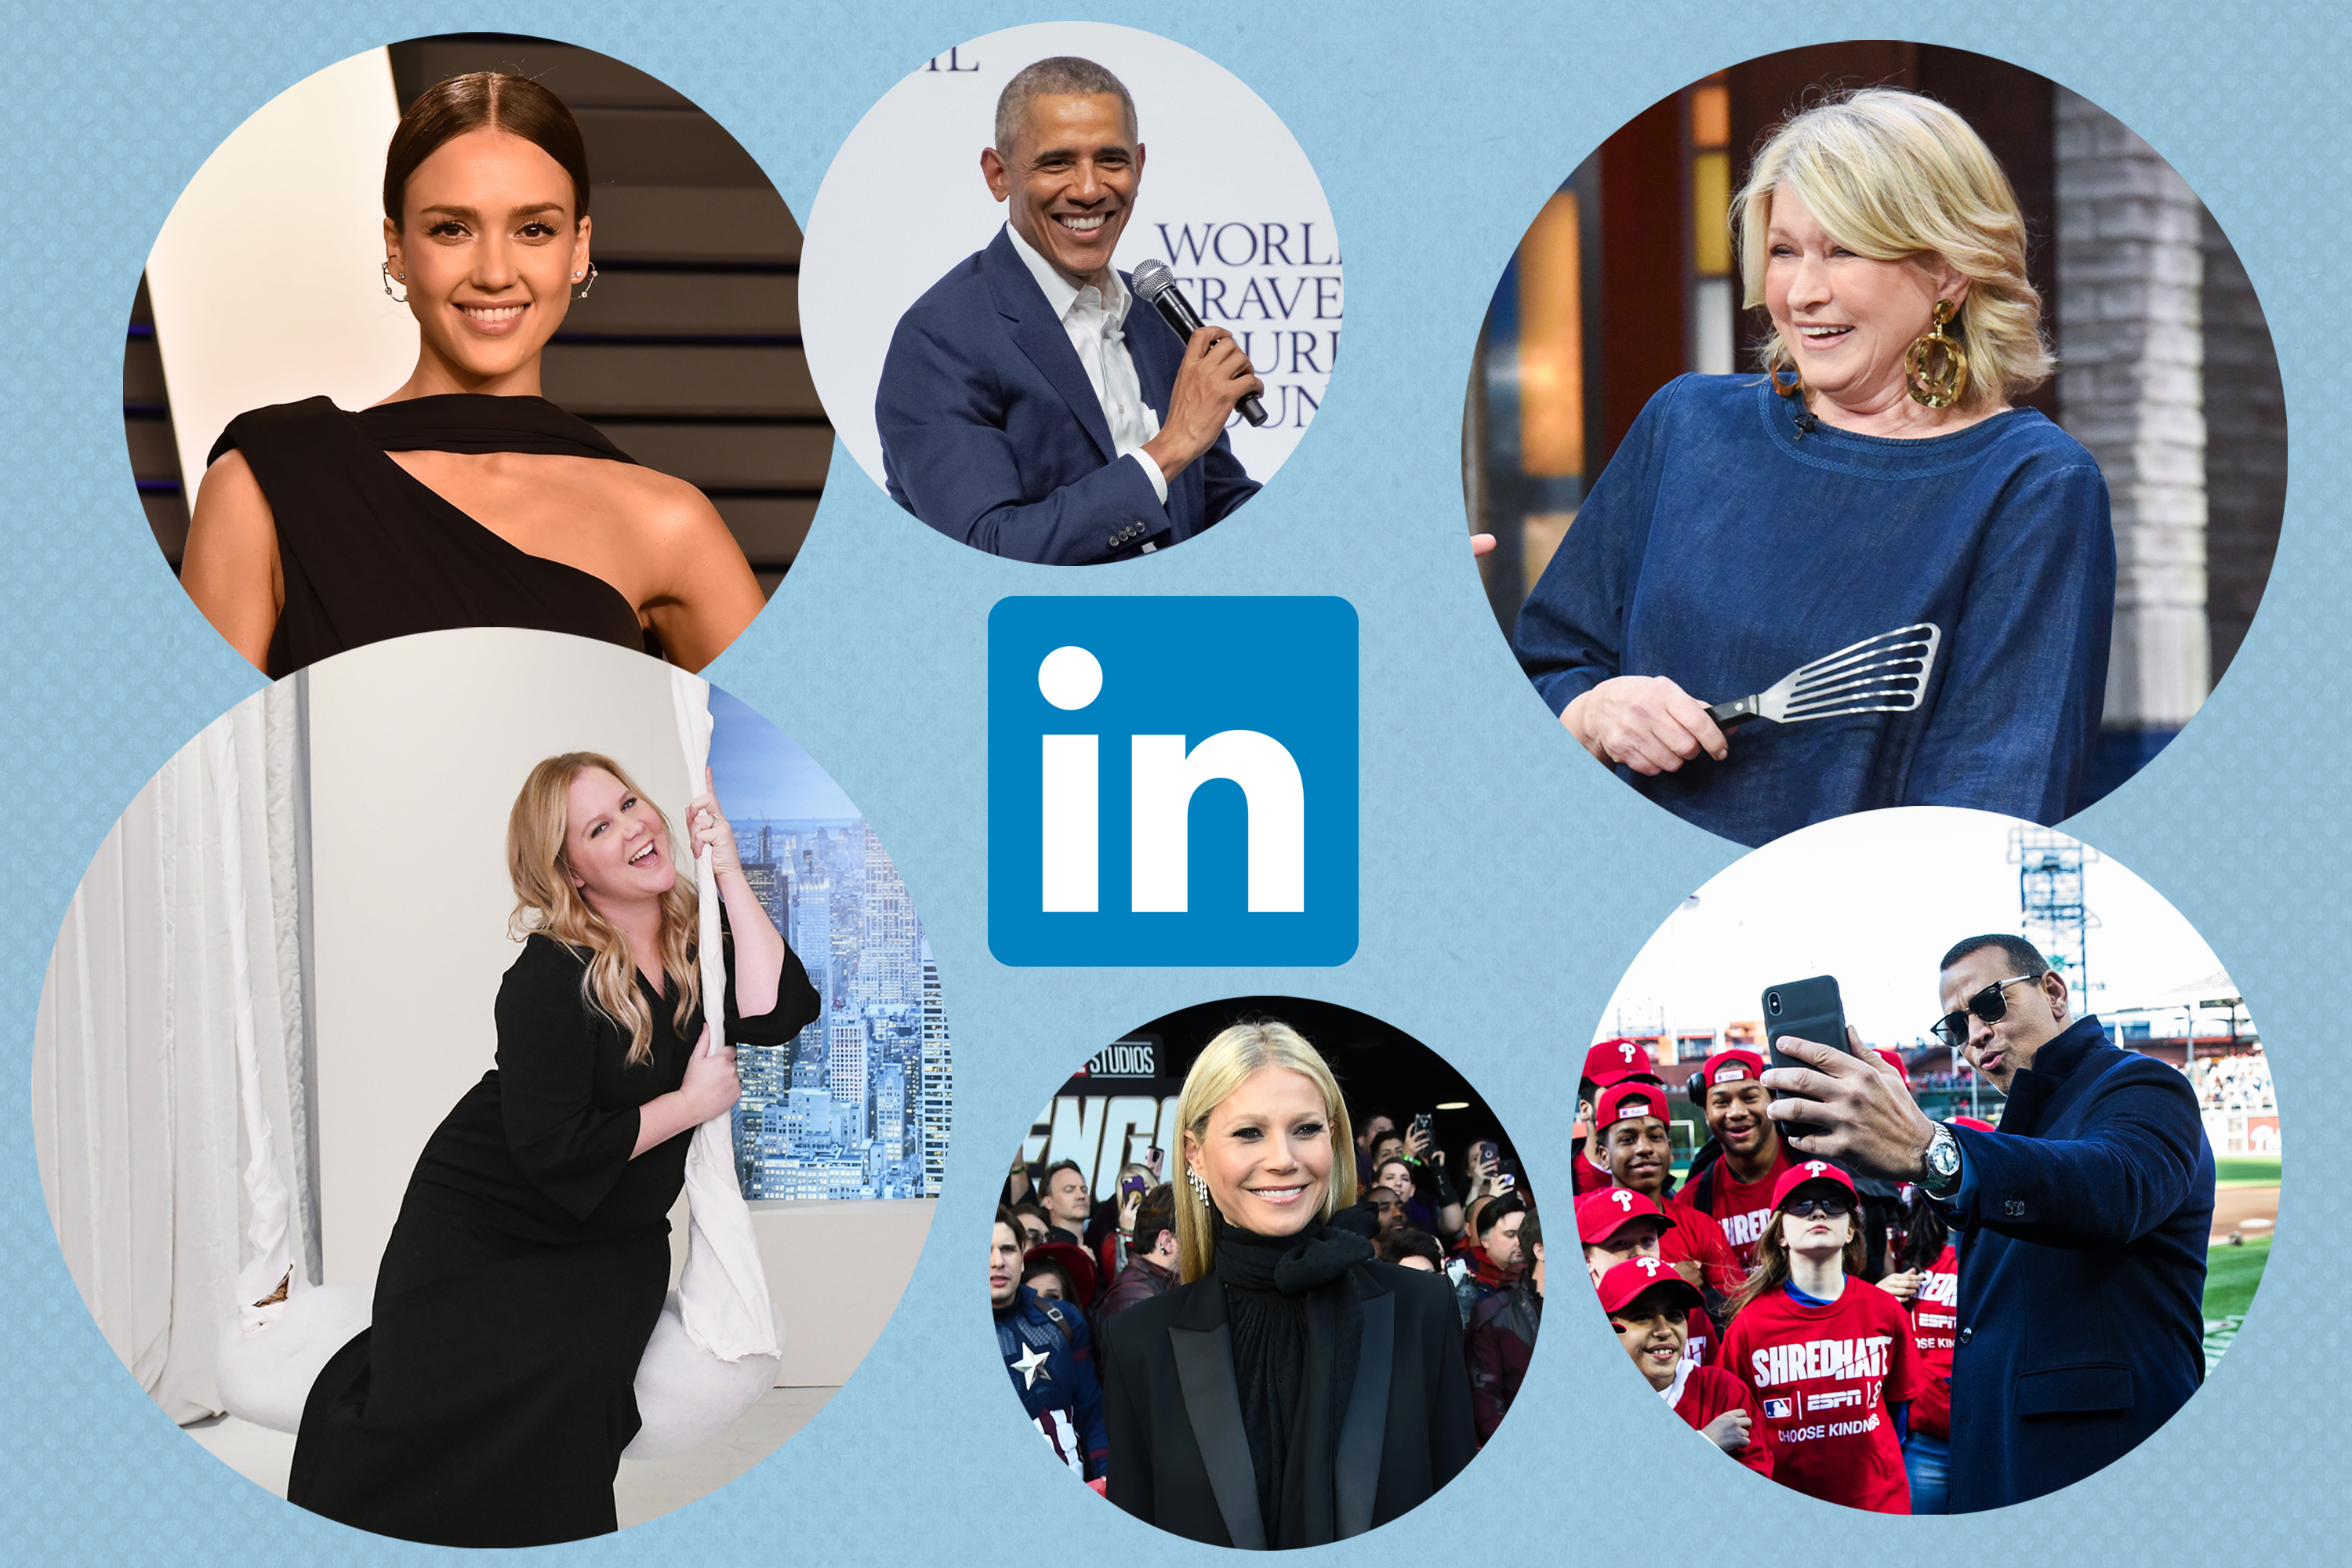 Barack Obama, Martha Stewart, and Diplo Have LinkedIn Profiles. I Went on a Quest to Find Out Why